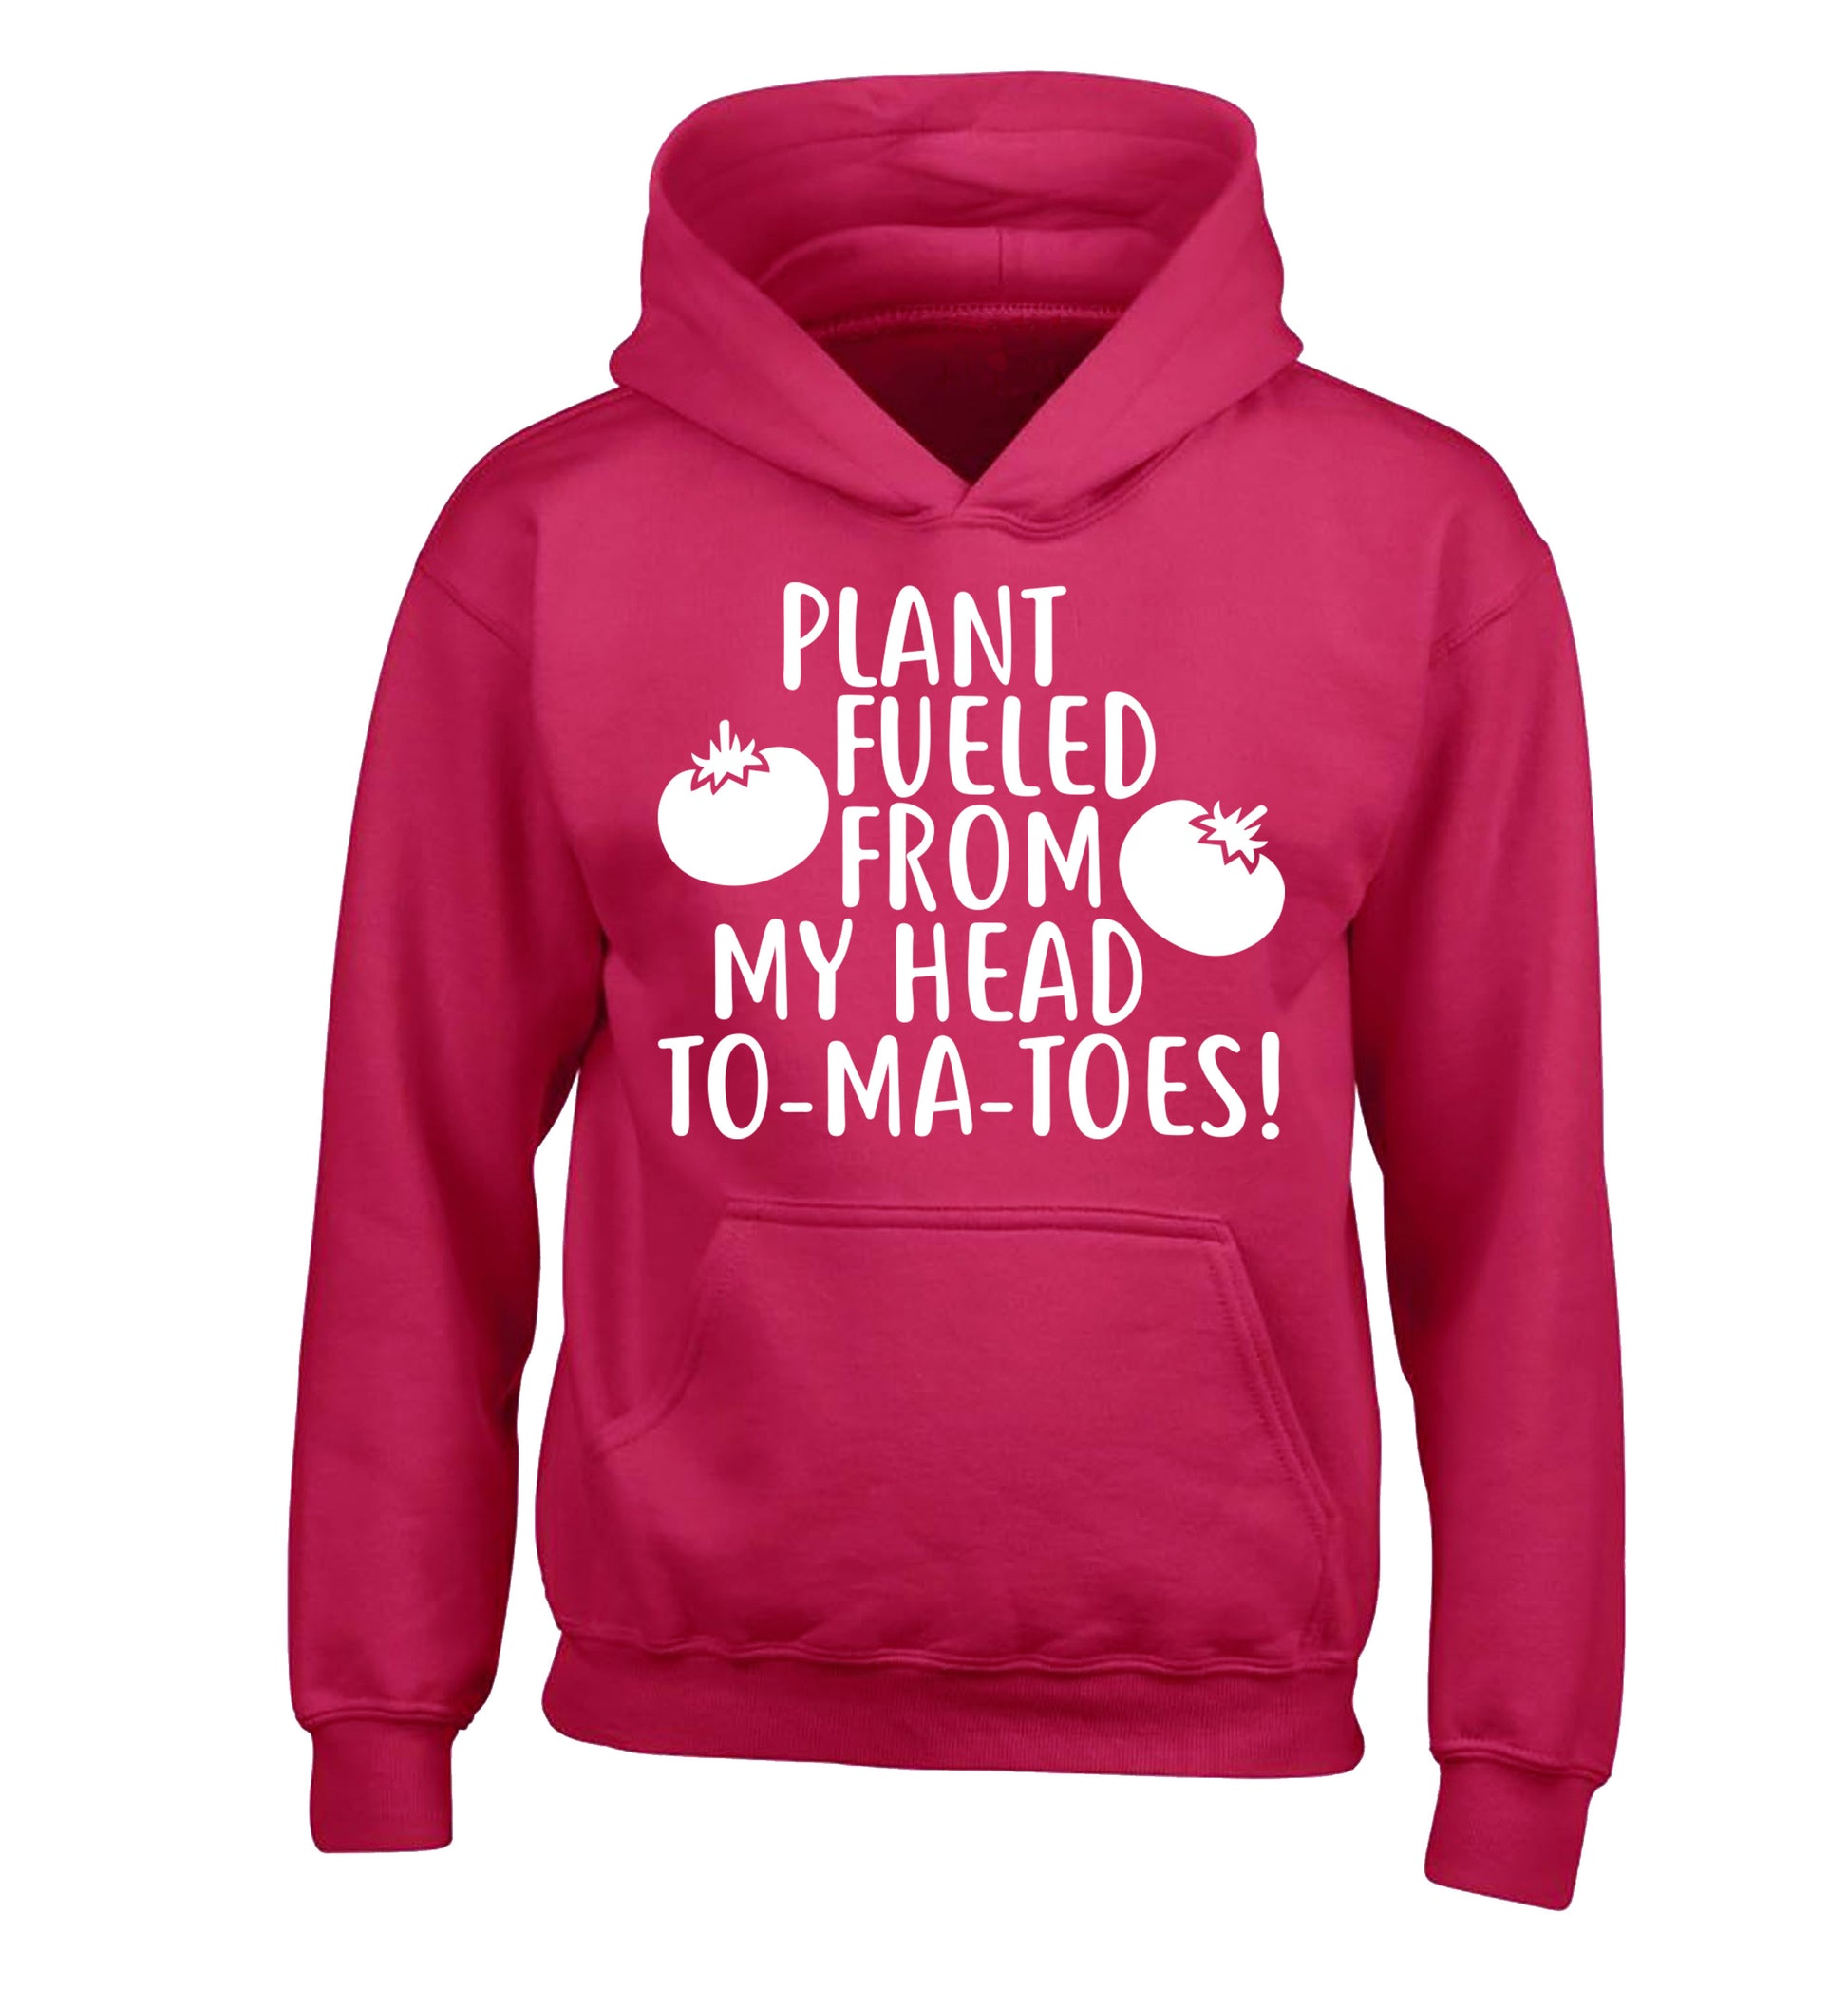 Plant fueled from my head to-ma-toes children's pink hoodie 12-14 Years